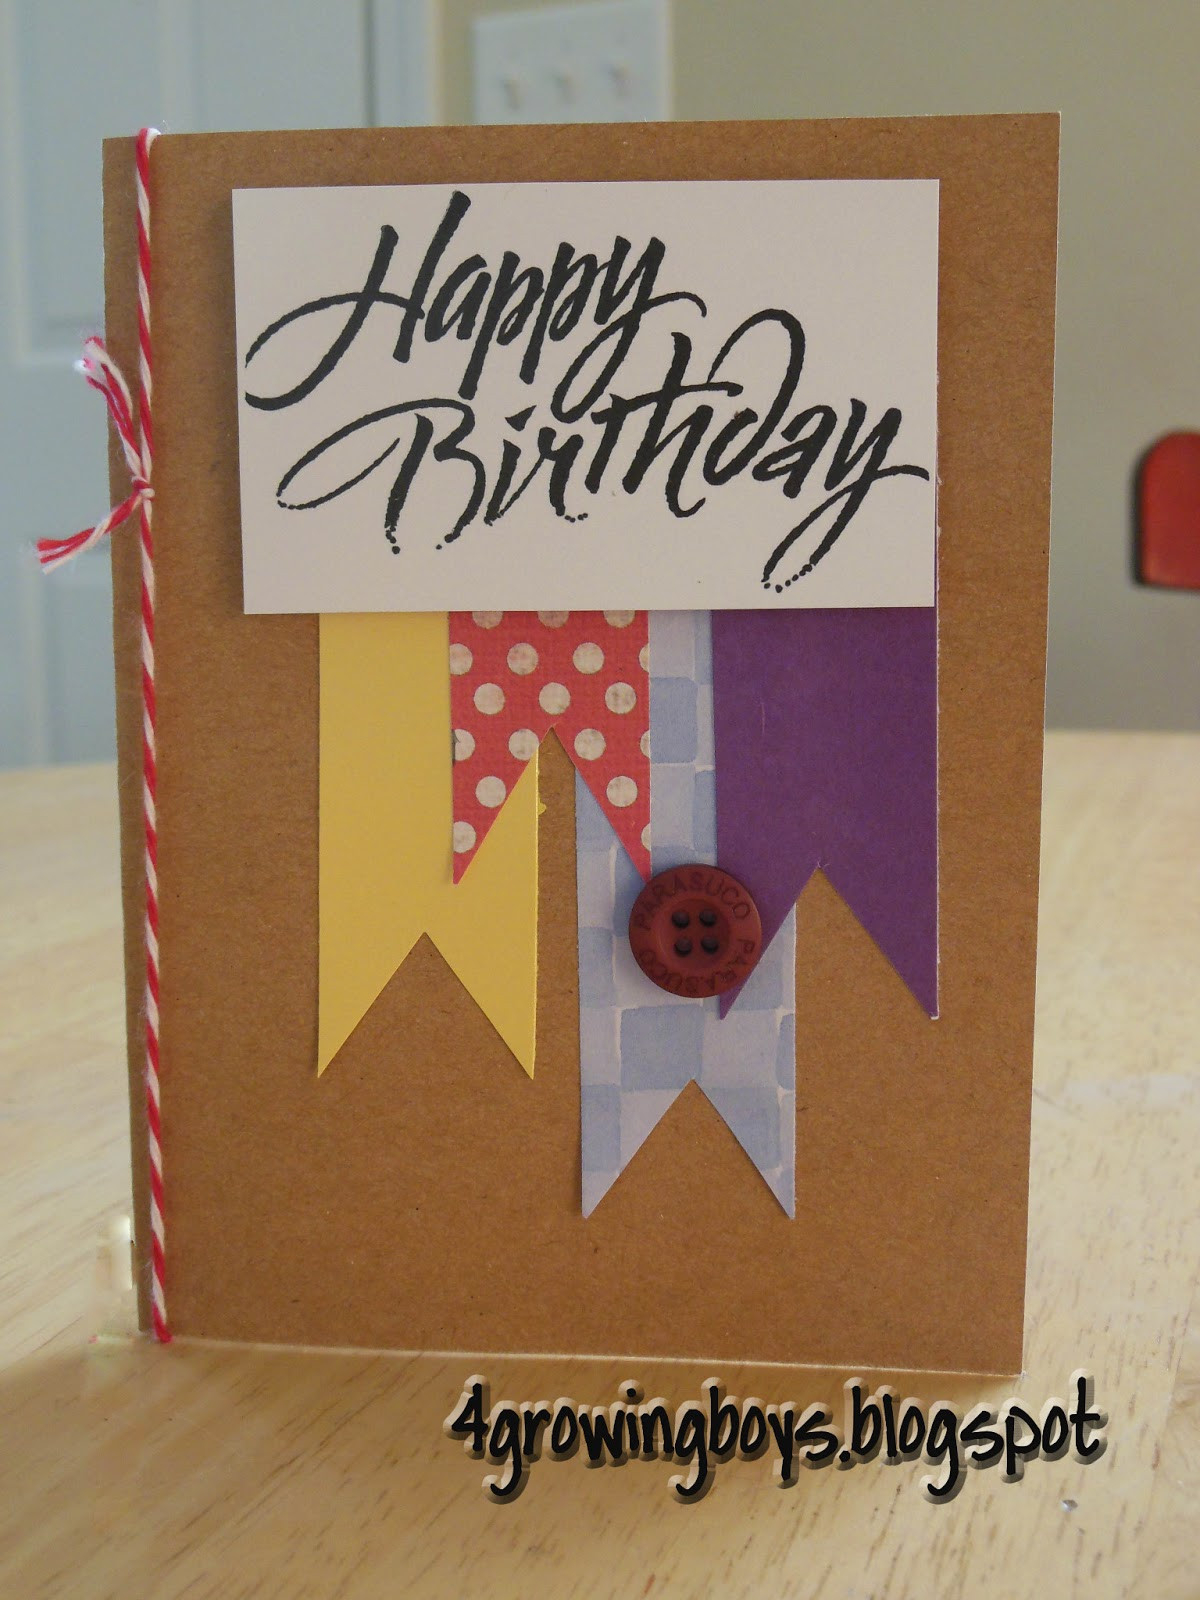 Creative Birthday Card Ideas For Best Friend Making Birthday Cards Easy Homemade Birthday Card Ideas For Best